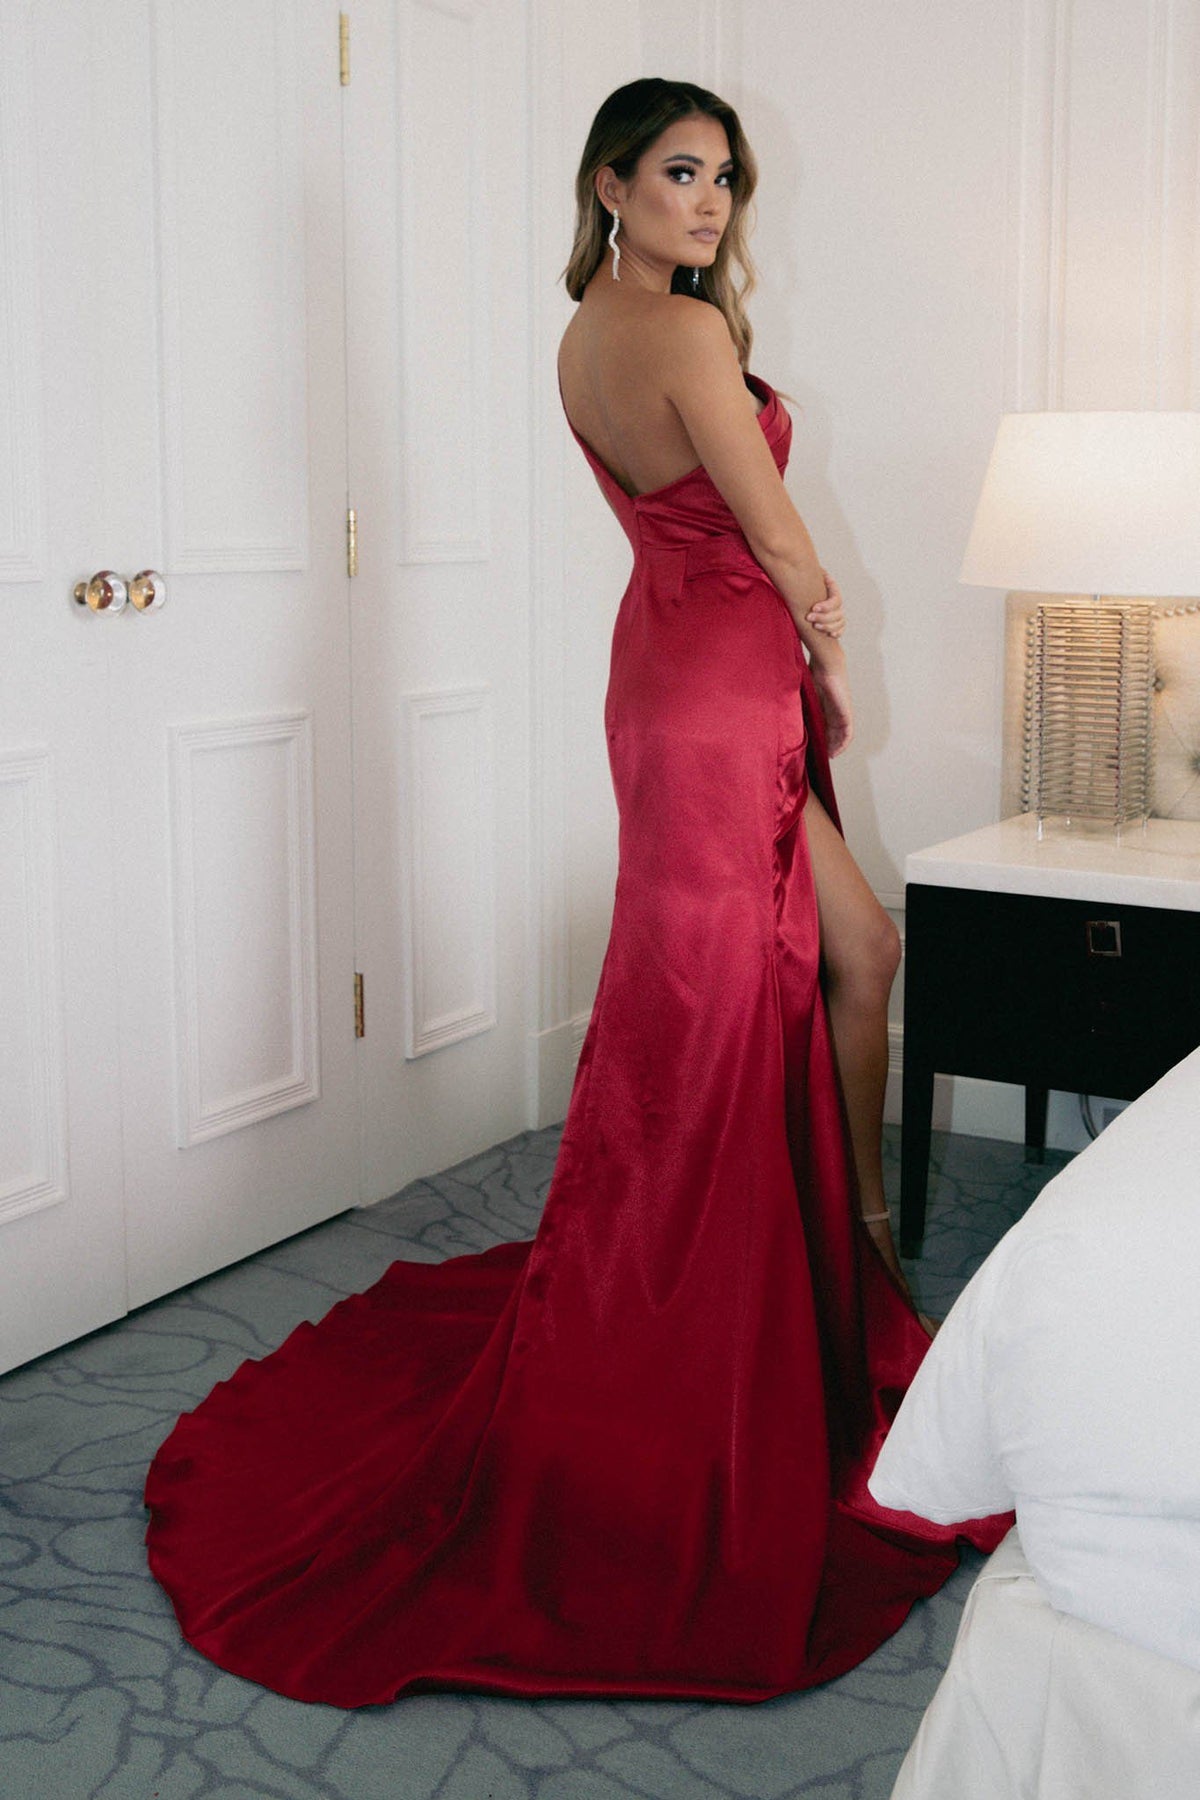 Deep Red Satin Full Length Evening Gown featuring One Shoulder Design, Gathering Ruched Waist Detail, Thigh High Slit and Sweep Train